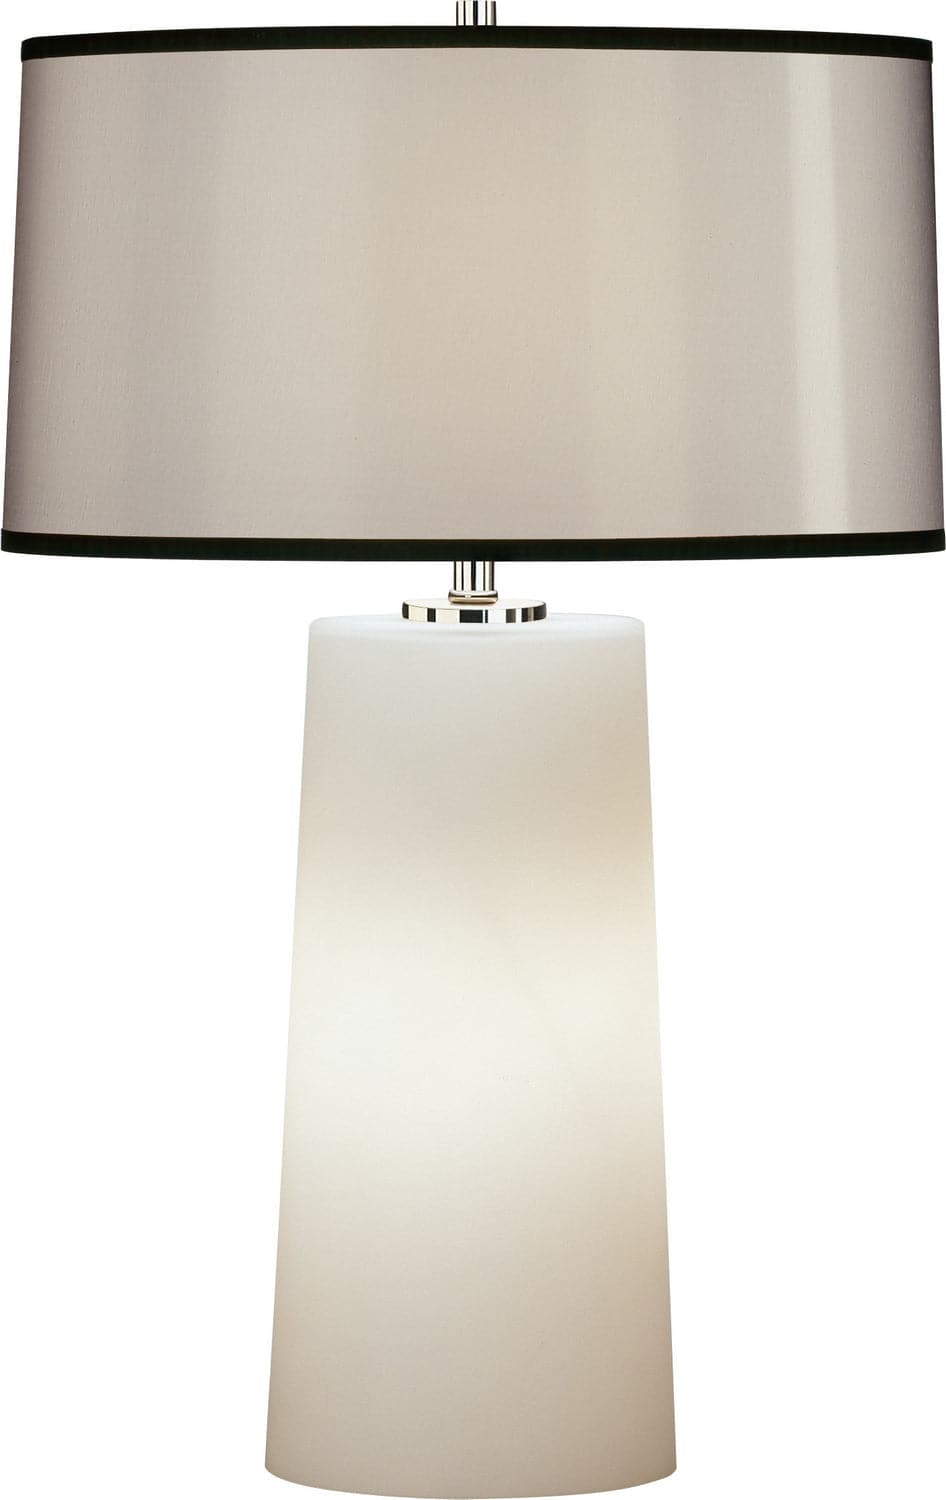 Robert Abbey - 1580B - Two Light Accent Lamp - Rico Espinet Olinda - Frosted White Cased Glass Base w/Night Light